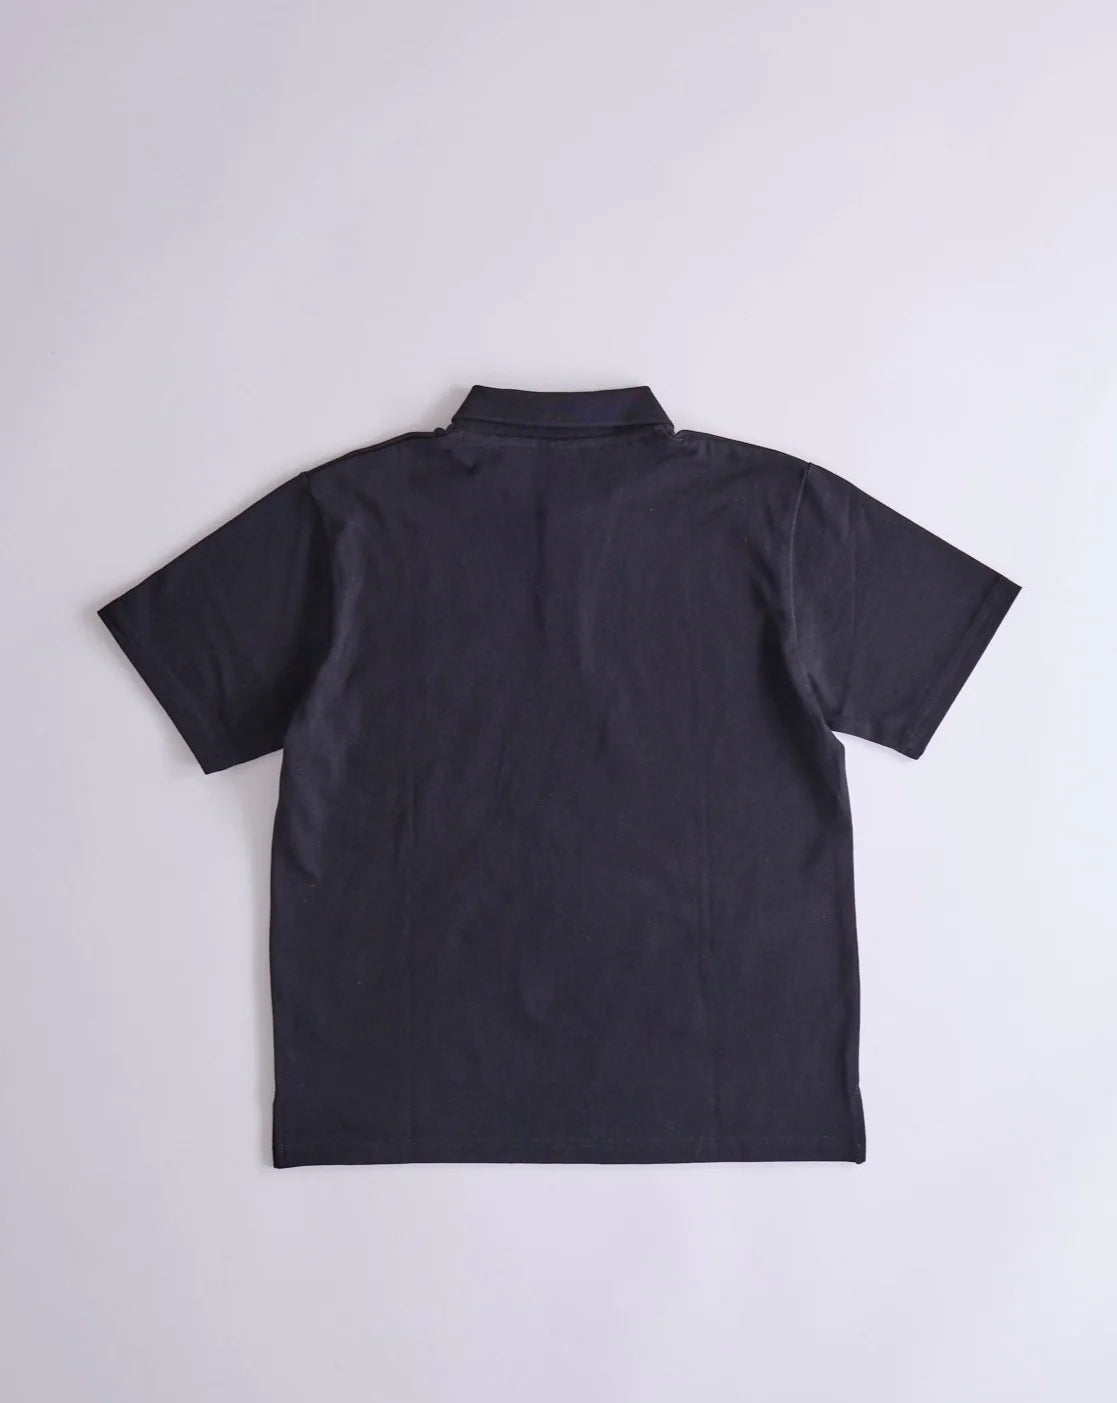 FRUIT OF THE LOOM Embroidery Polo(BLACK)